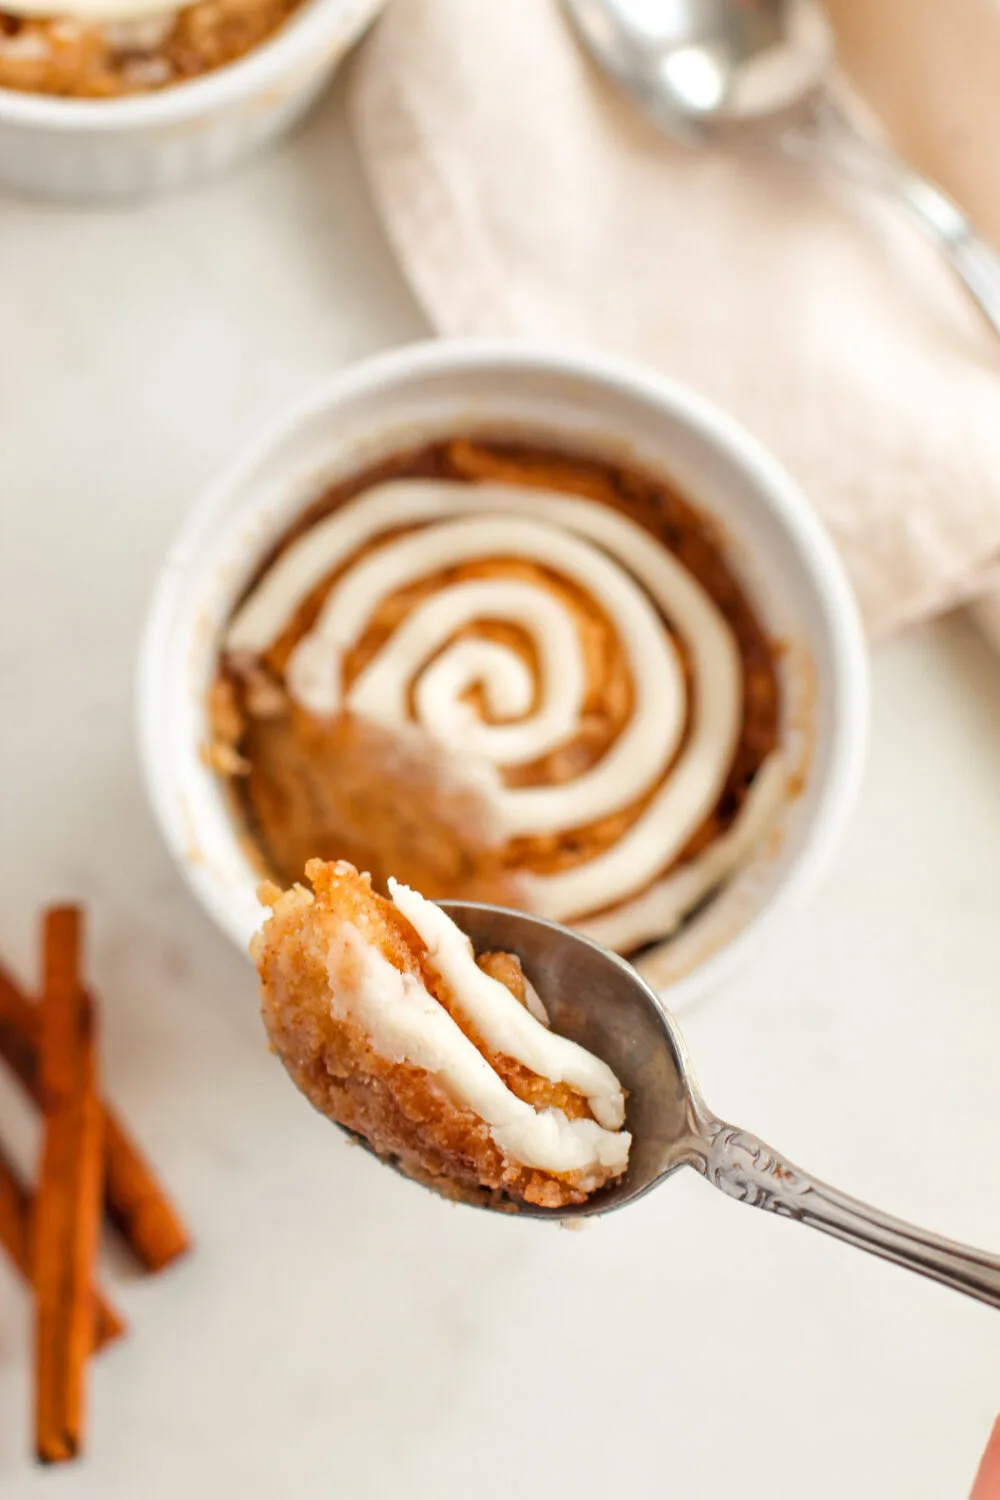 Spoonful of cinnamon cake with icing.